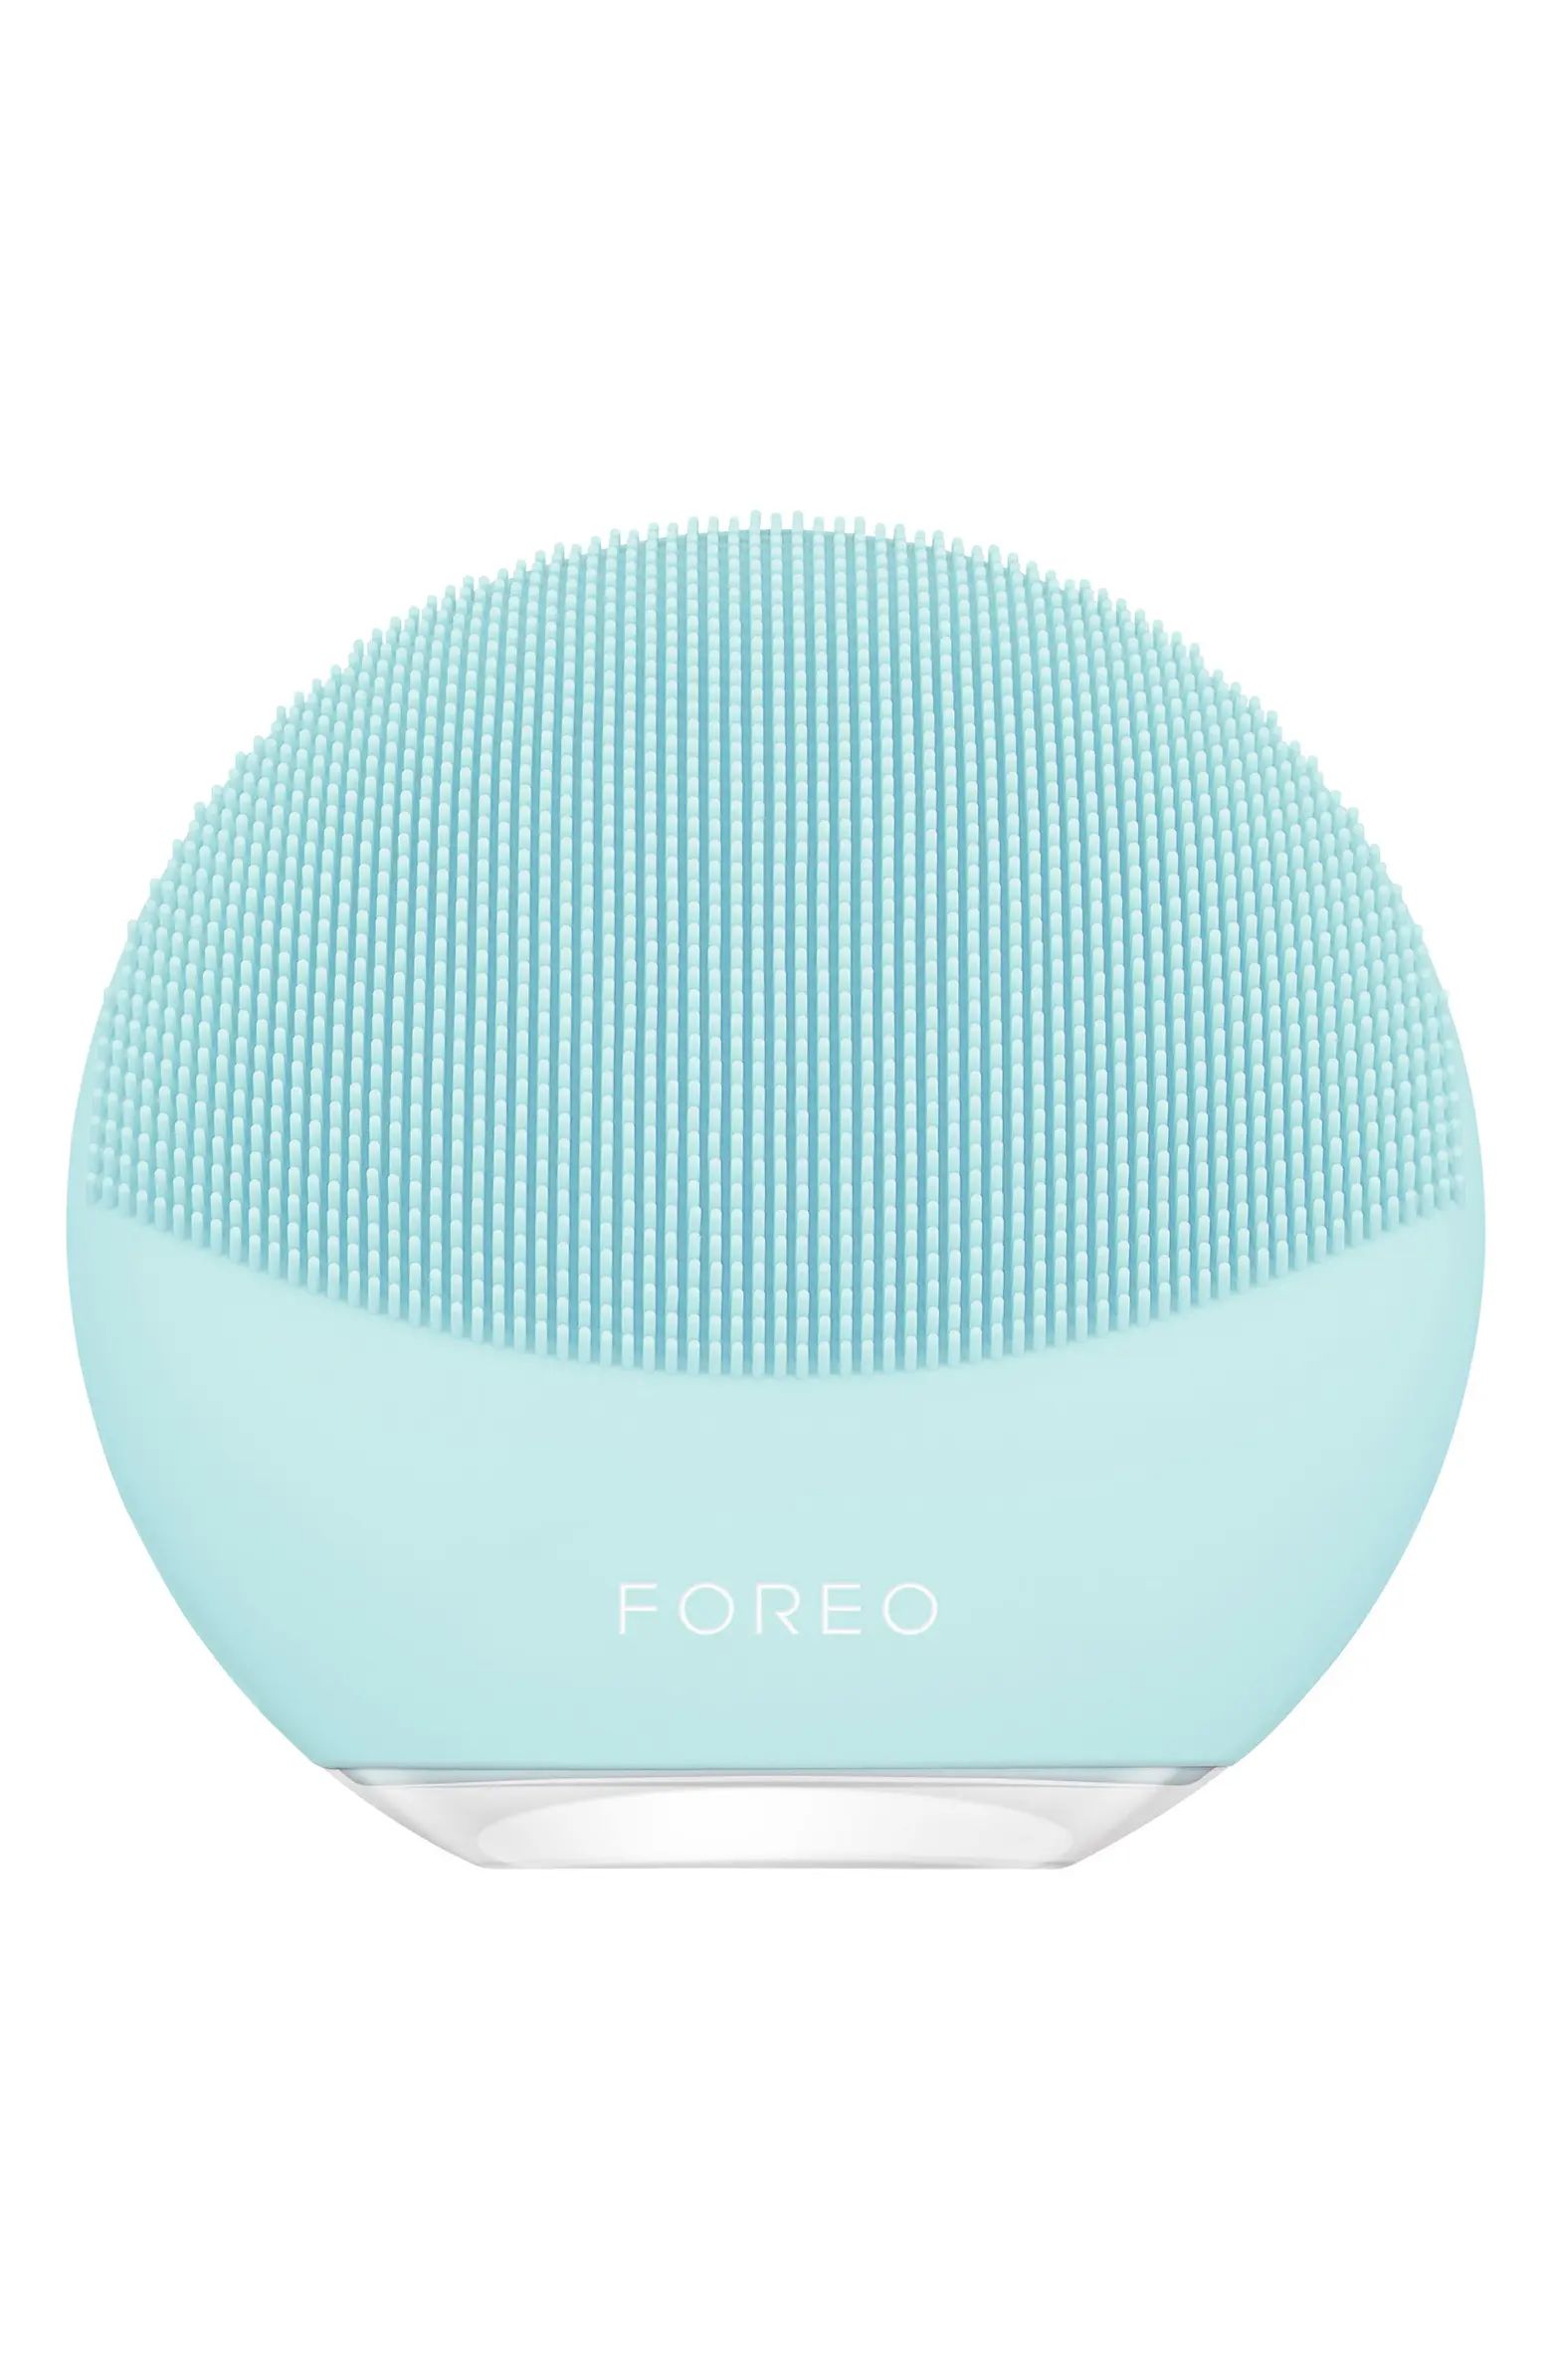 LUNA™ mini 3 Compact Facial Cleansing Device | Nordstrom Canada